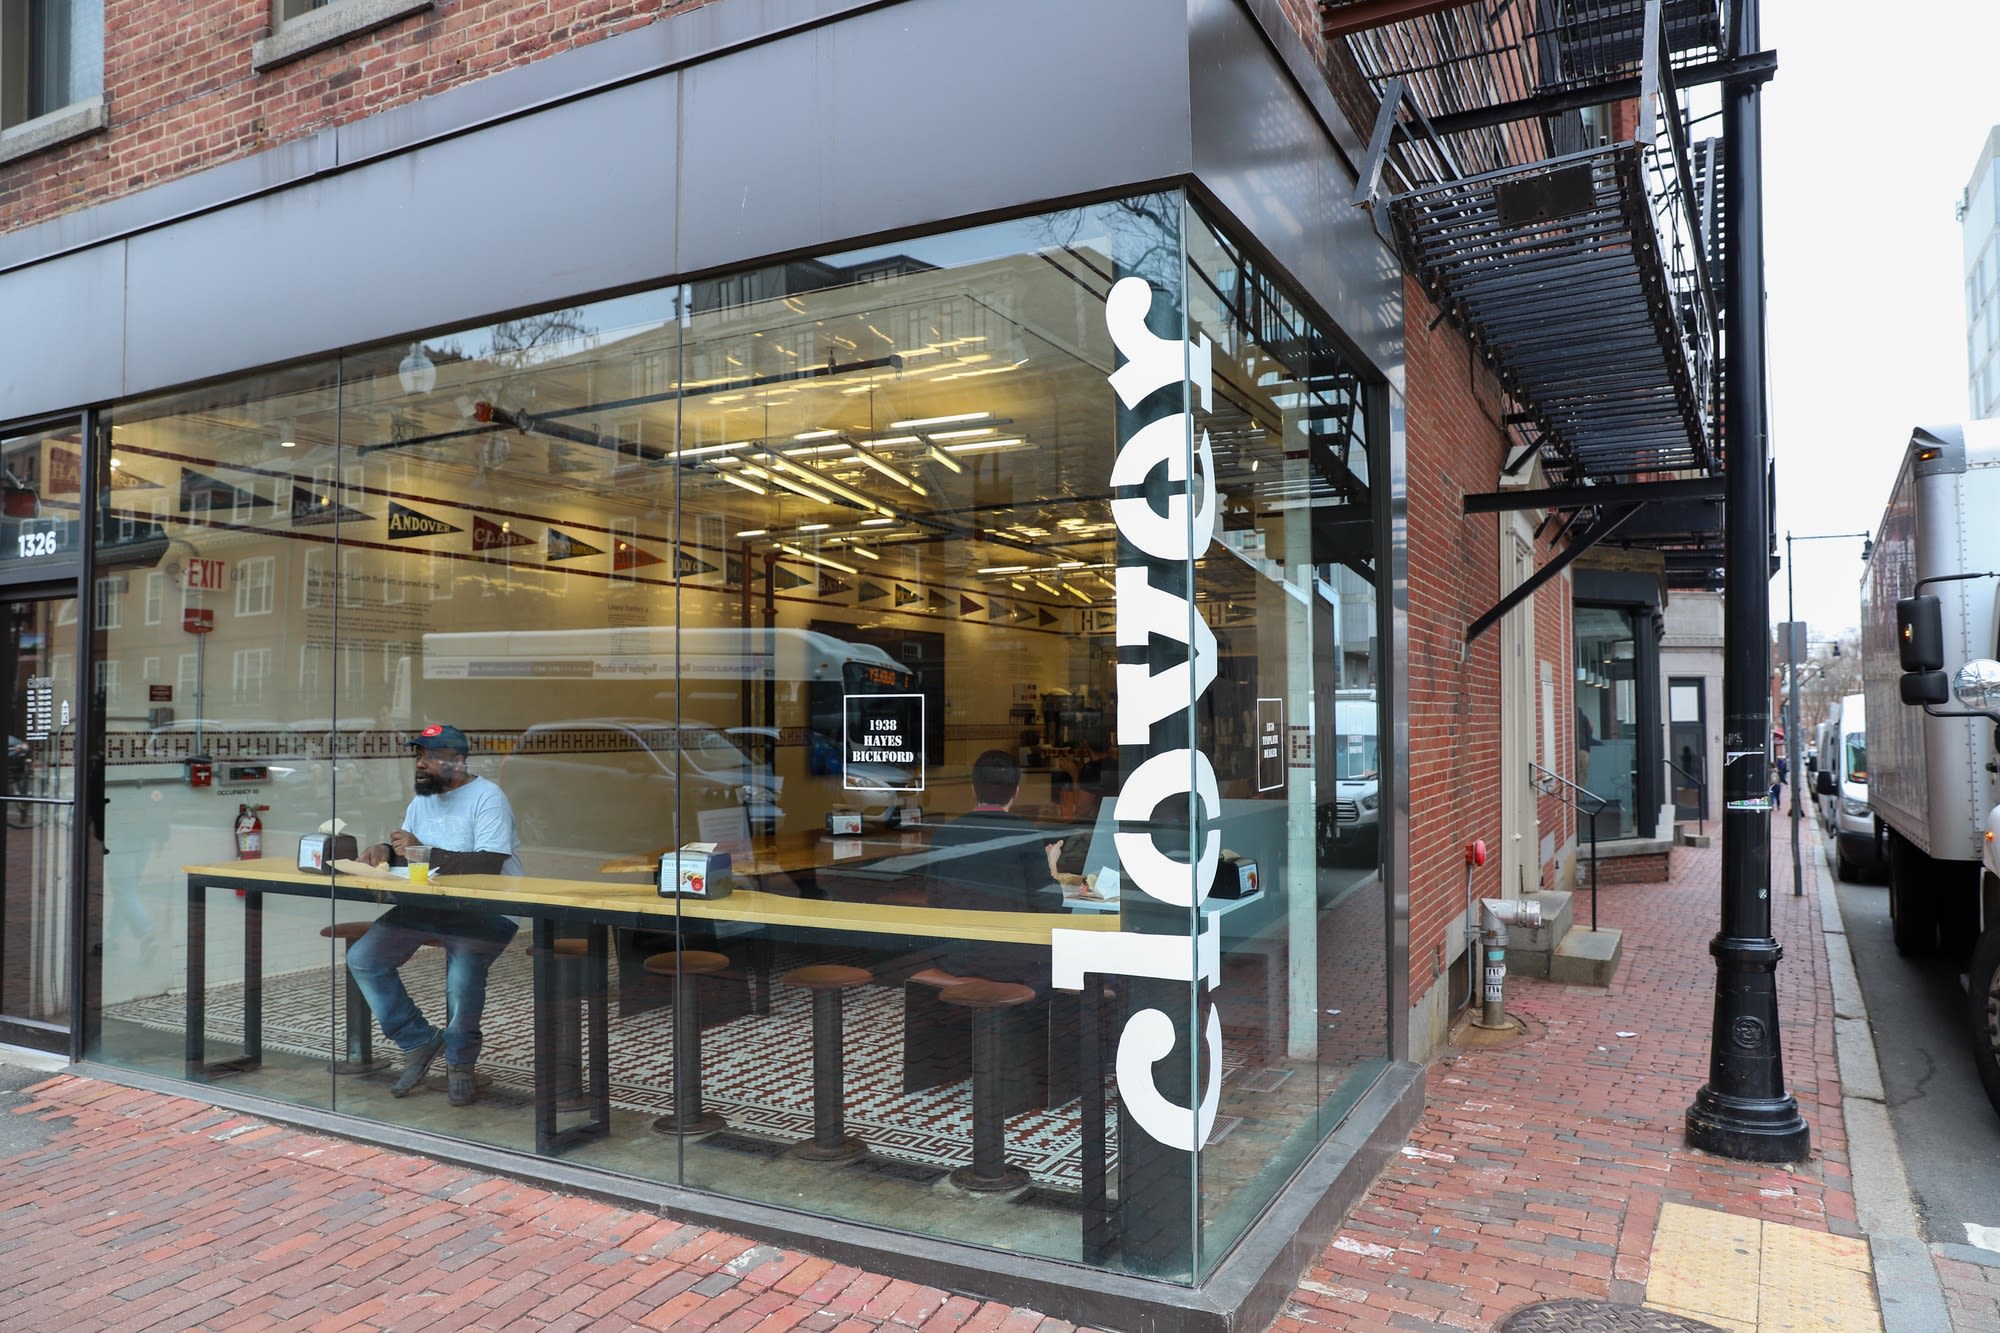 Clover to Keep All Cambridge Locations Open After Surviving Bankruptcy | News | The Harvard Crimson